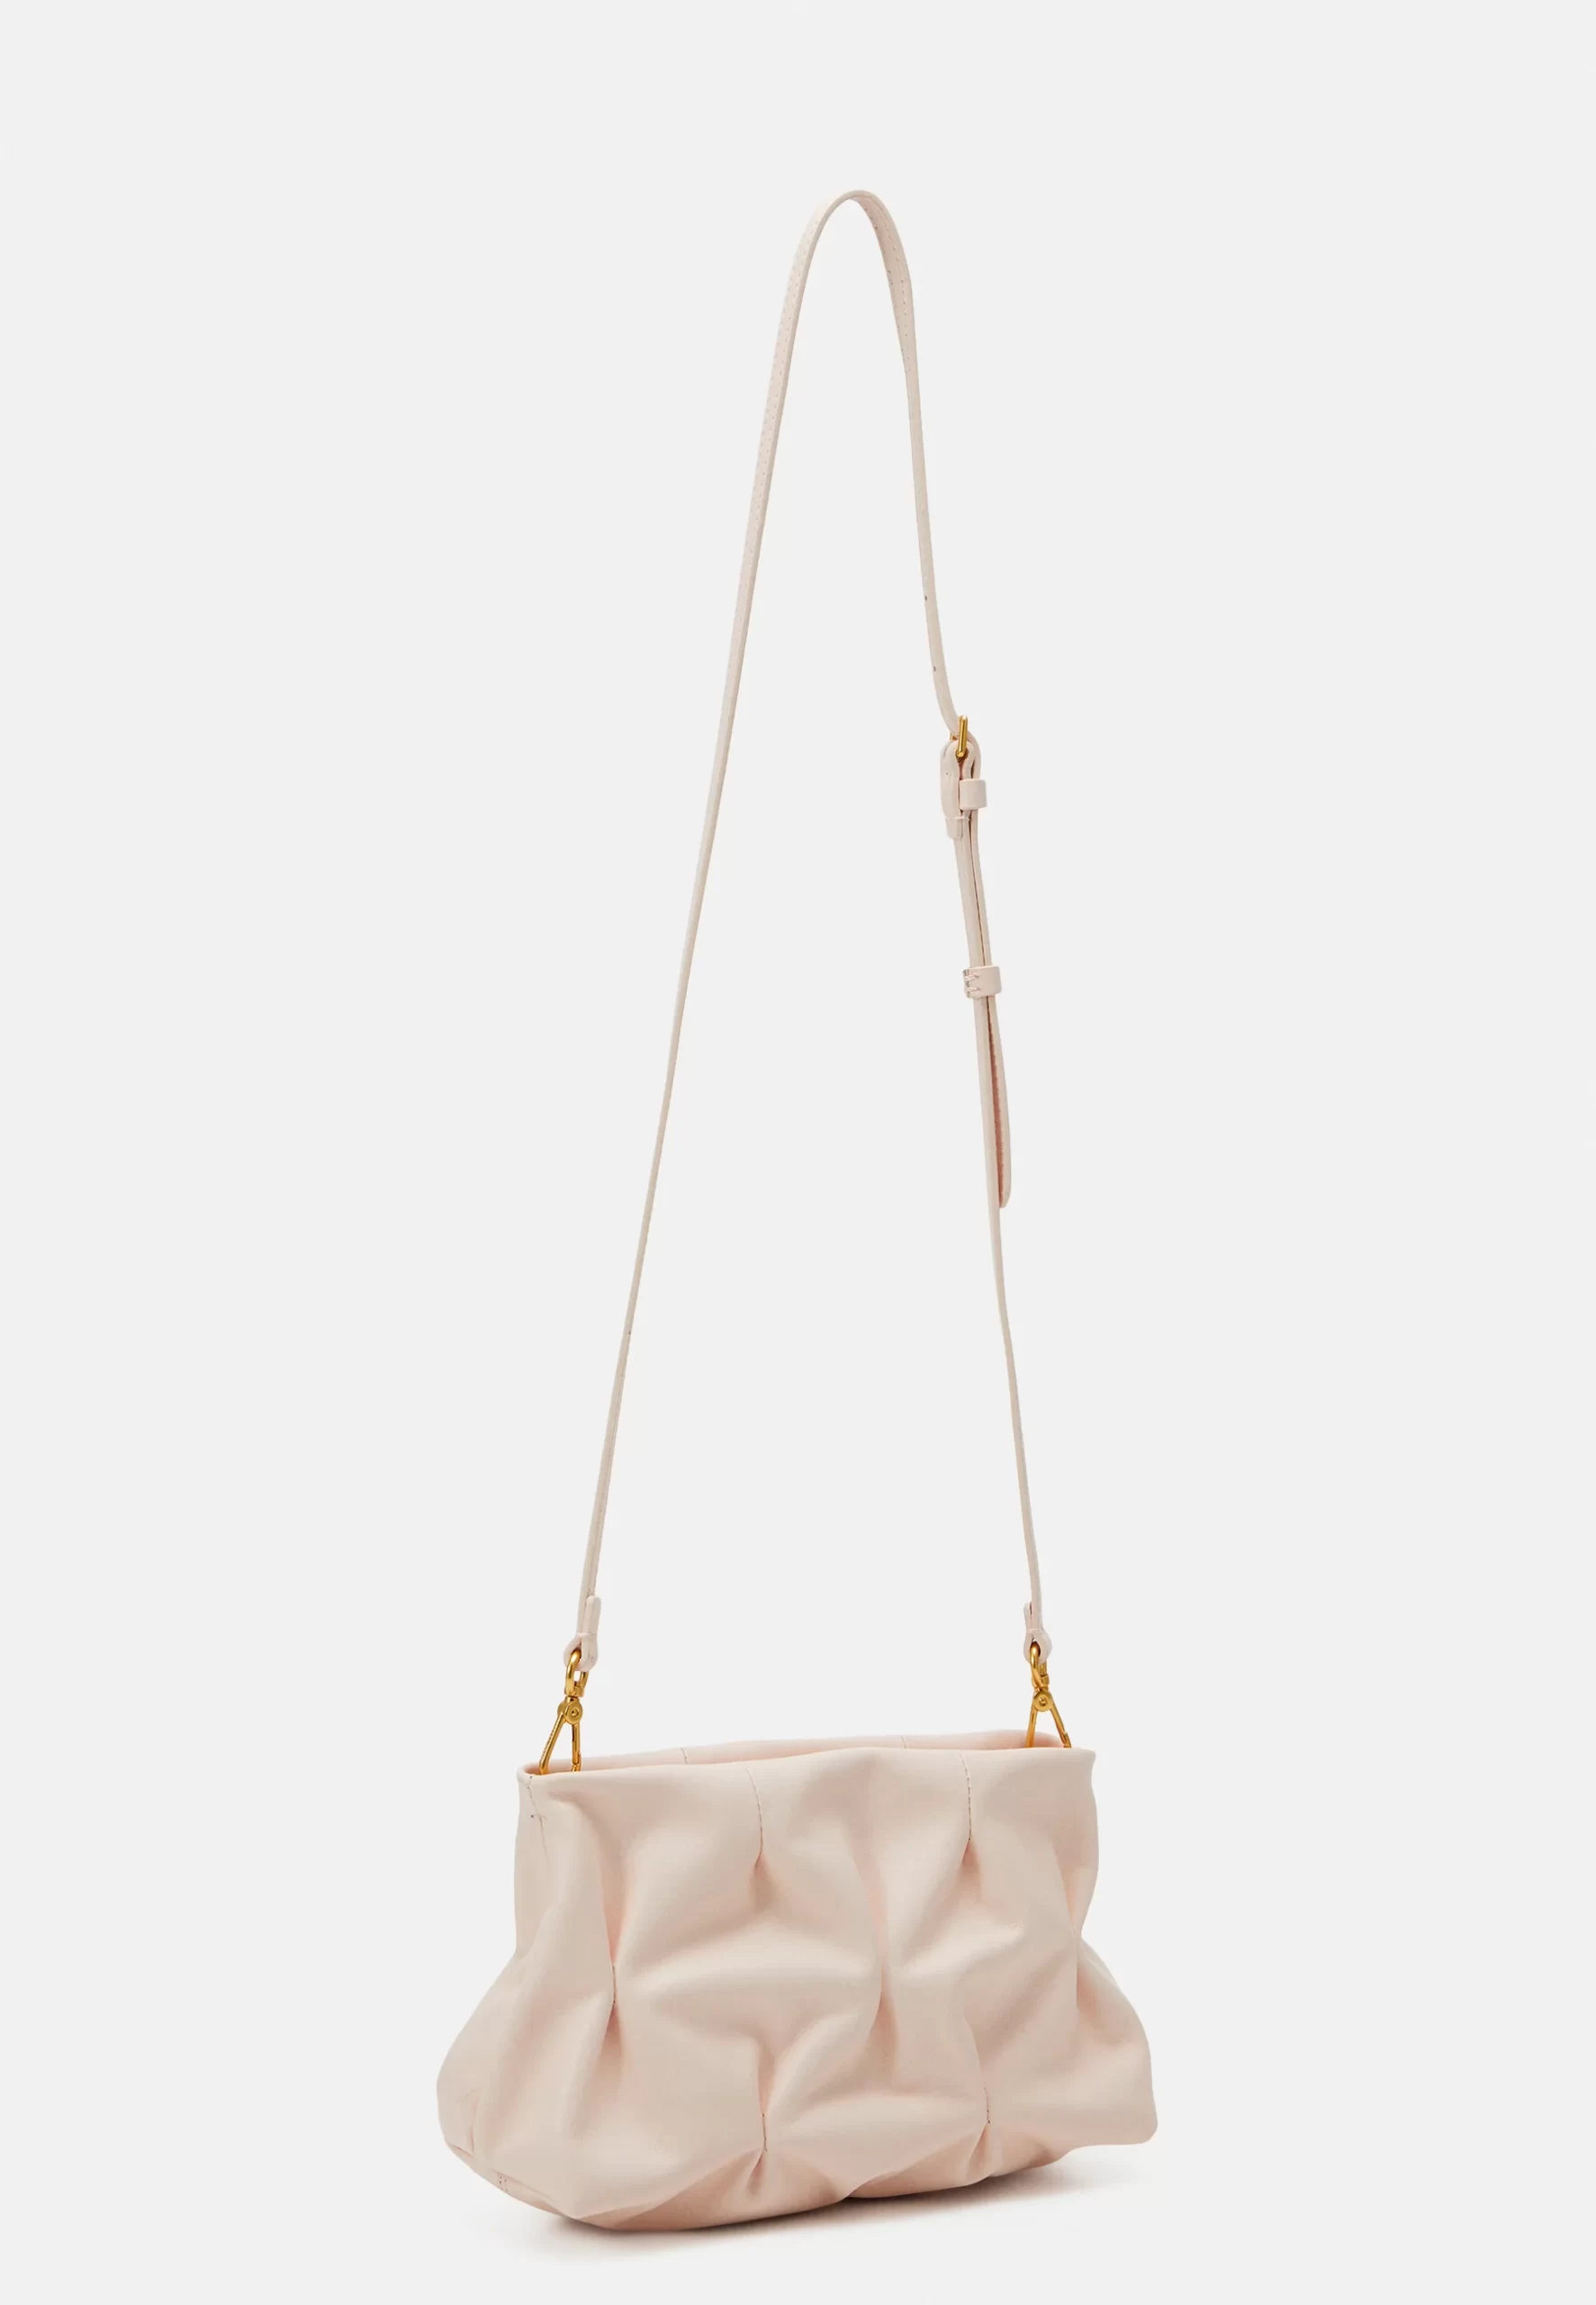 Coccinelle Ophelie Clutch in Soft Pink